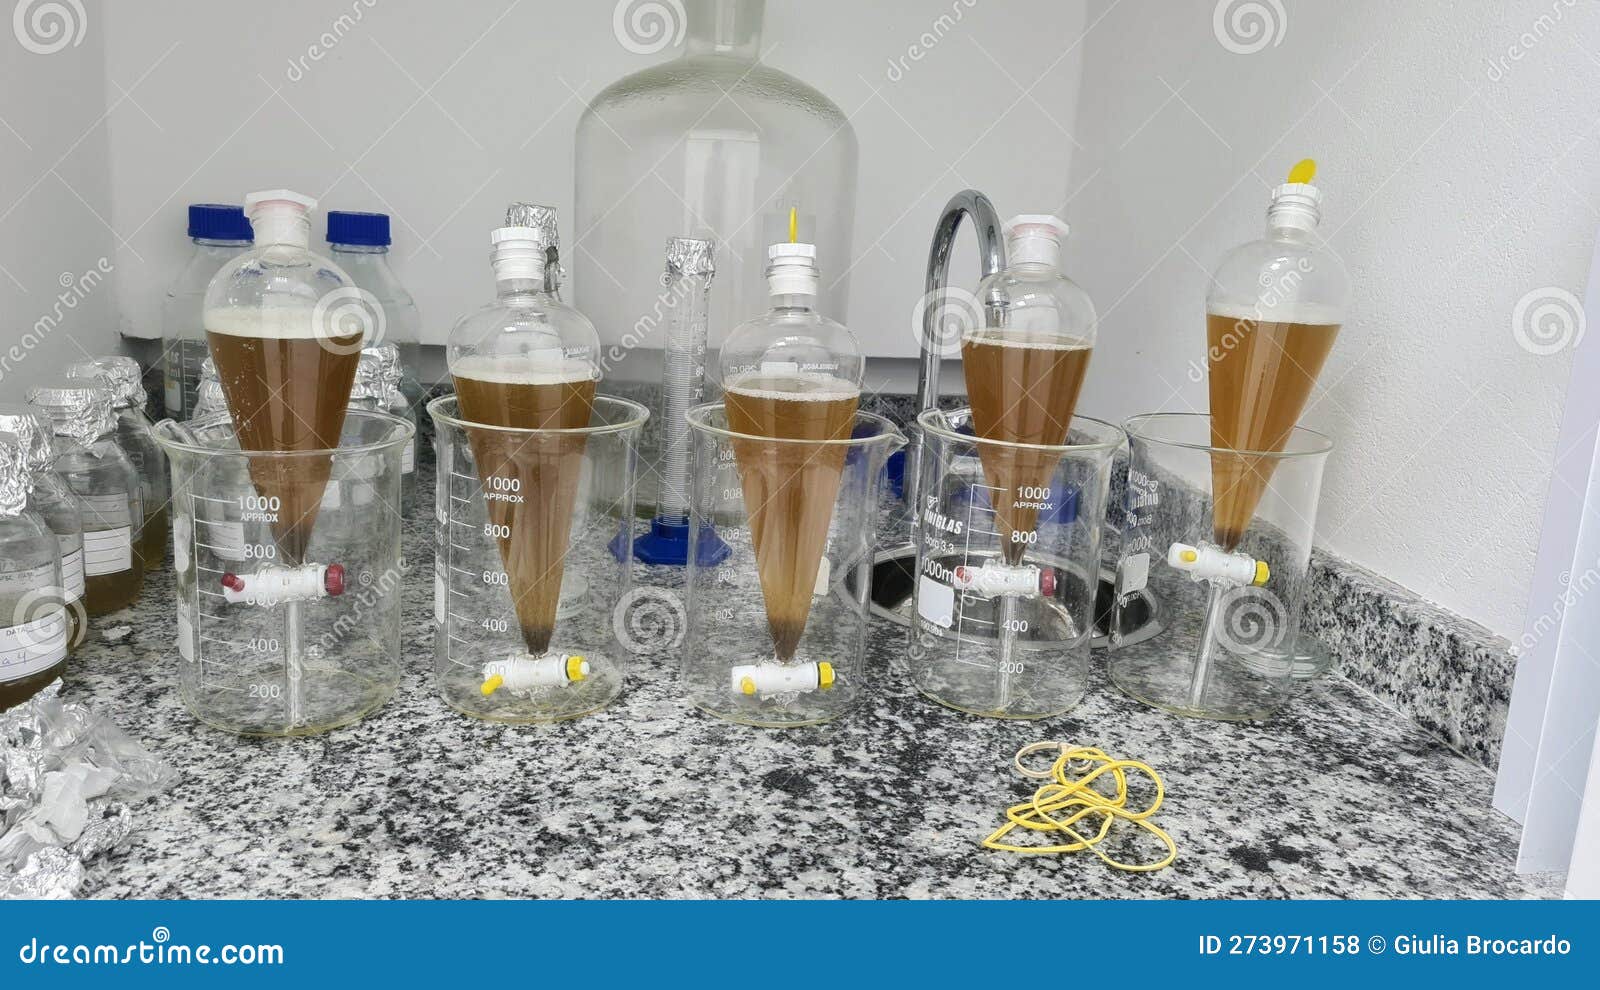 separation funnels with biological samples after being digested waiting for decantation. experiment realized in a laboratory